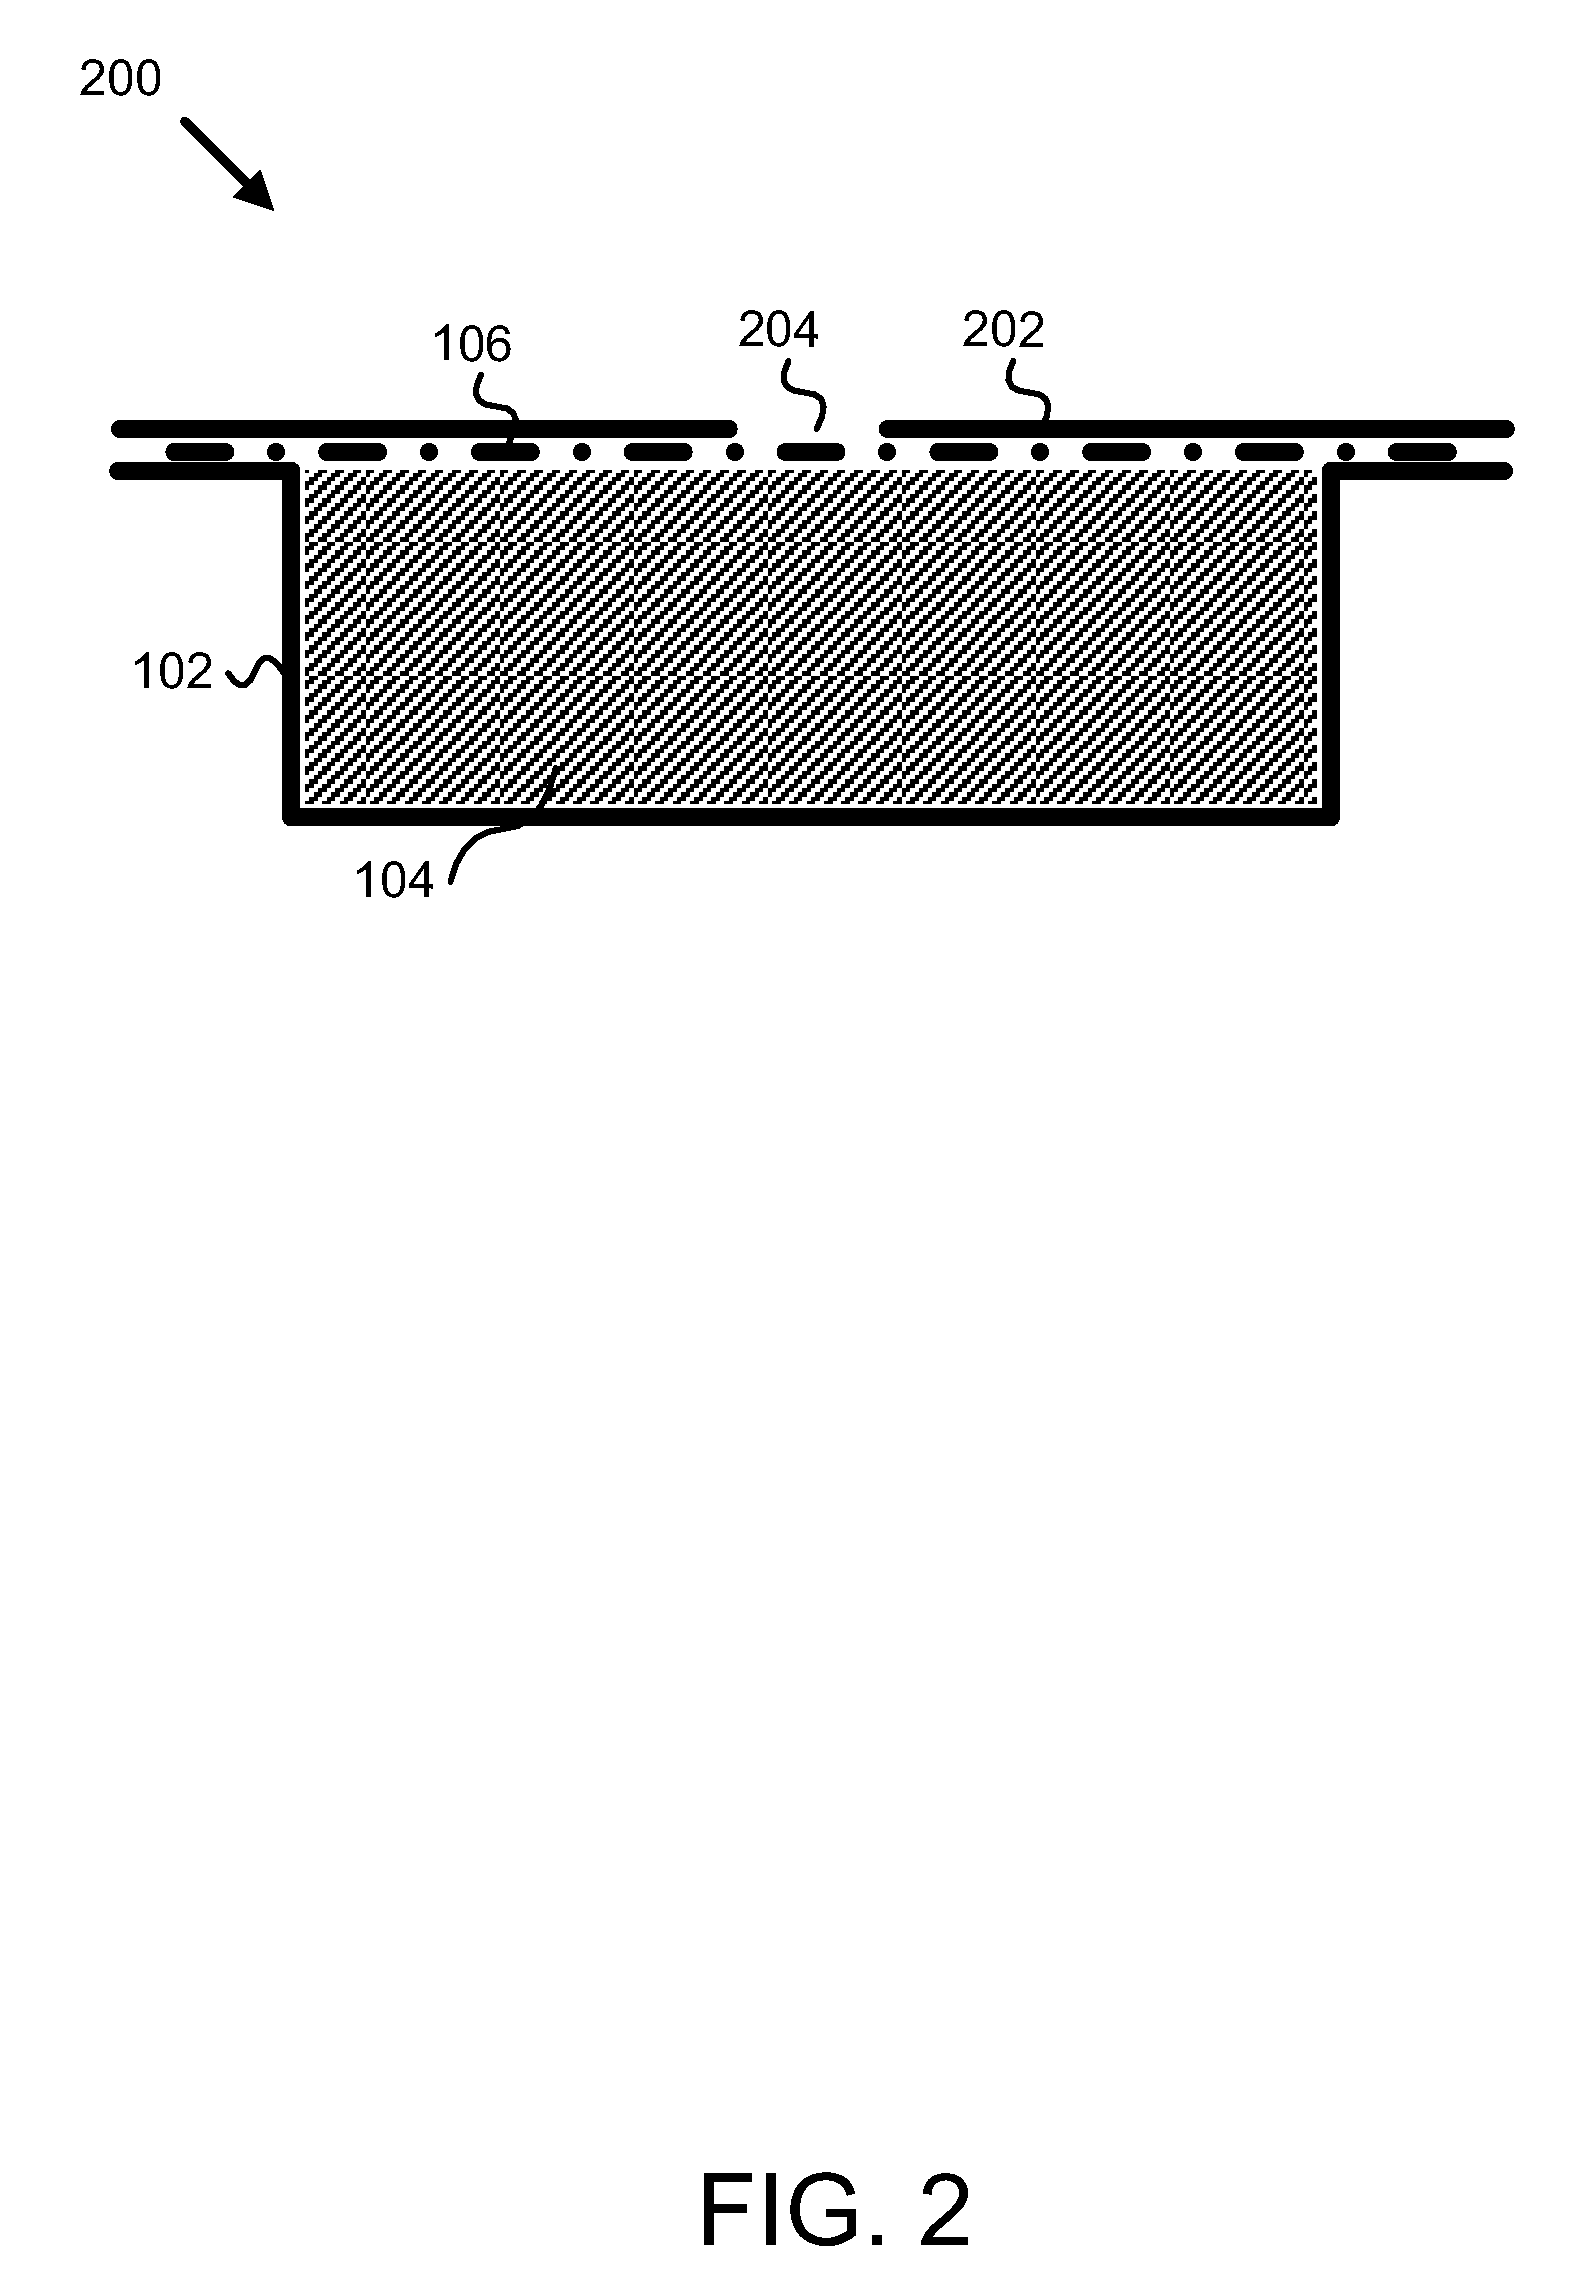 Apparatus, system ,and method for controlling out-gassing and humidity in a closed space-constrained environment